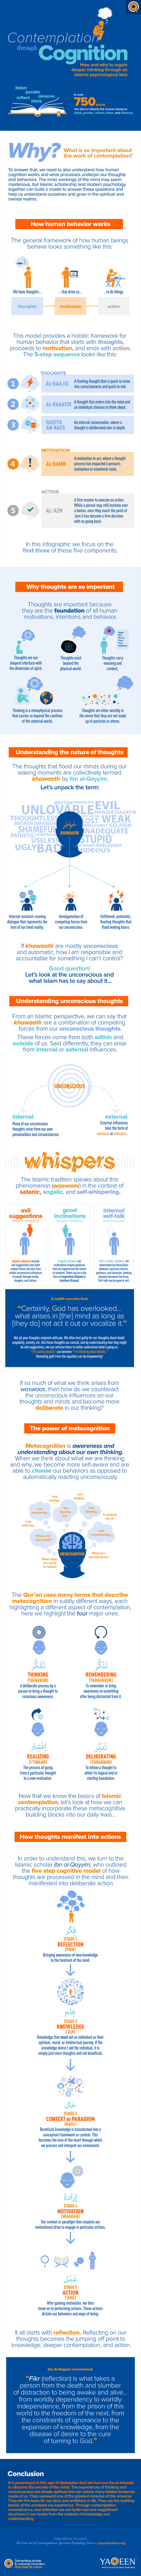 Contemplation_through_cognition_full_infographic